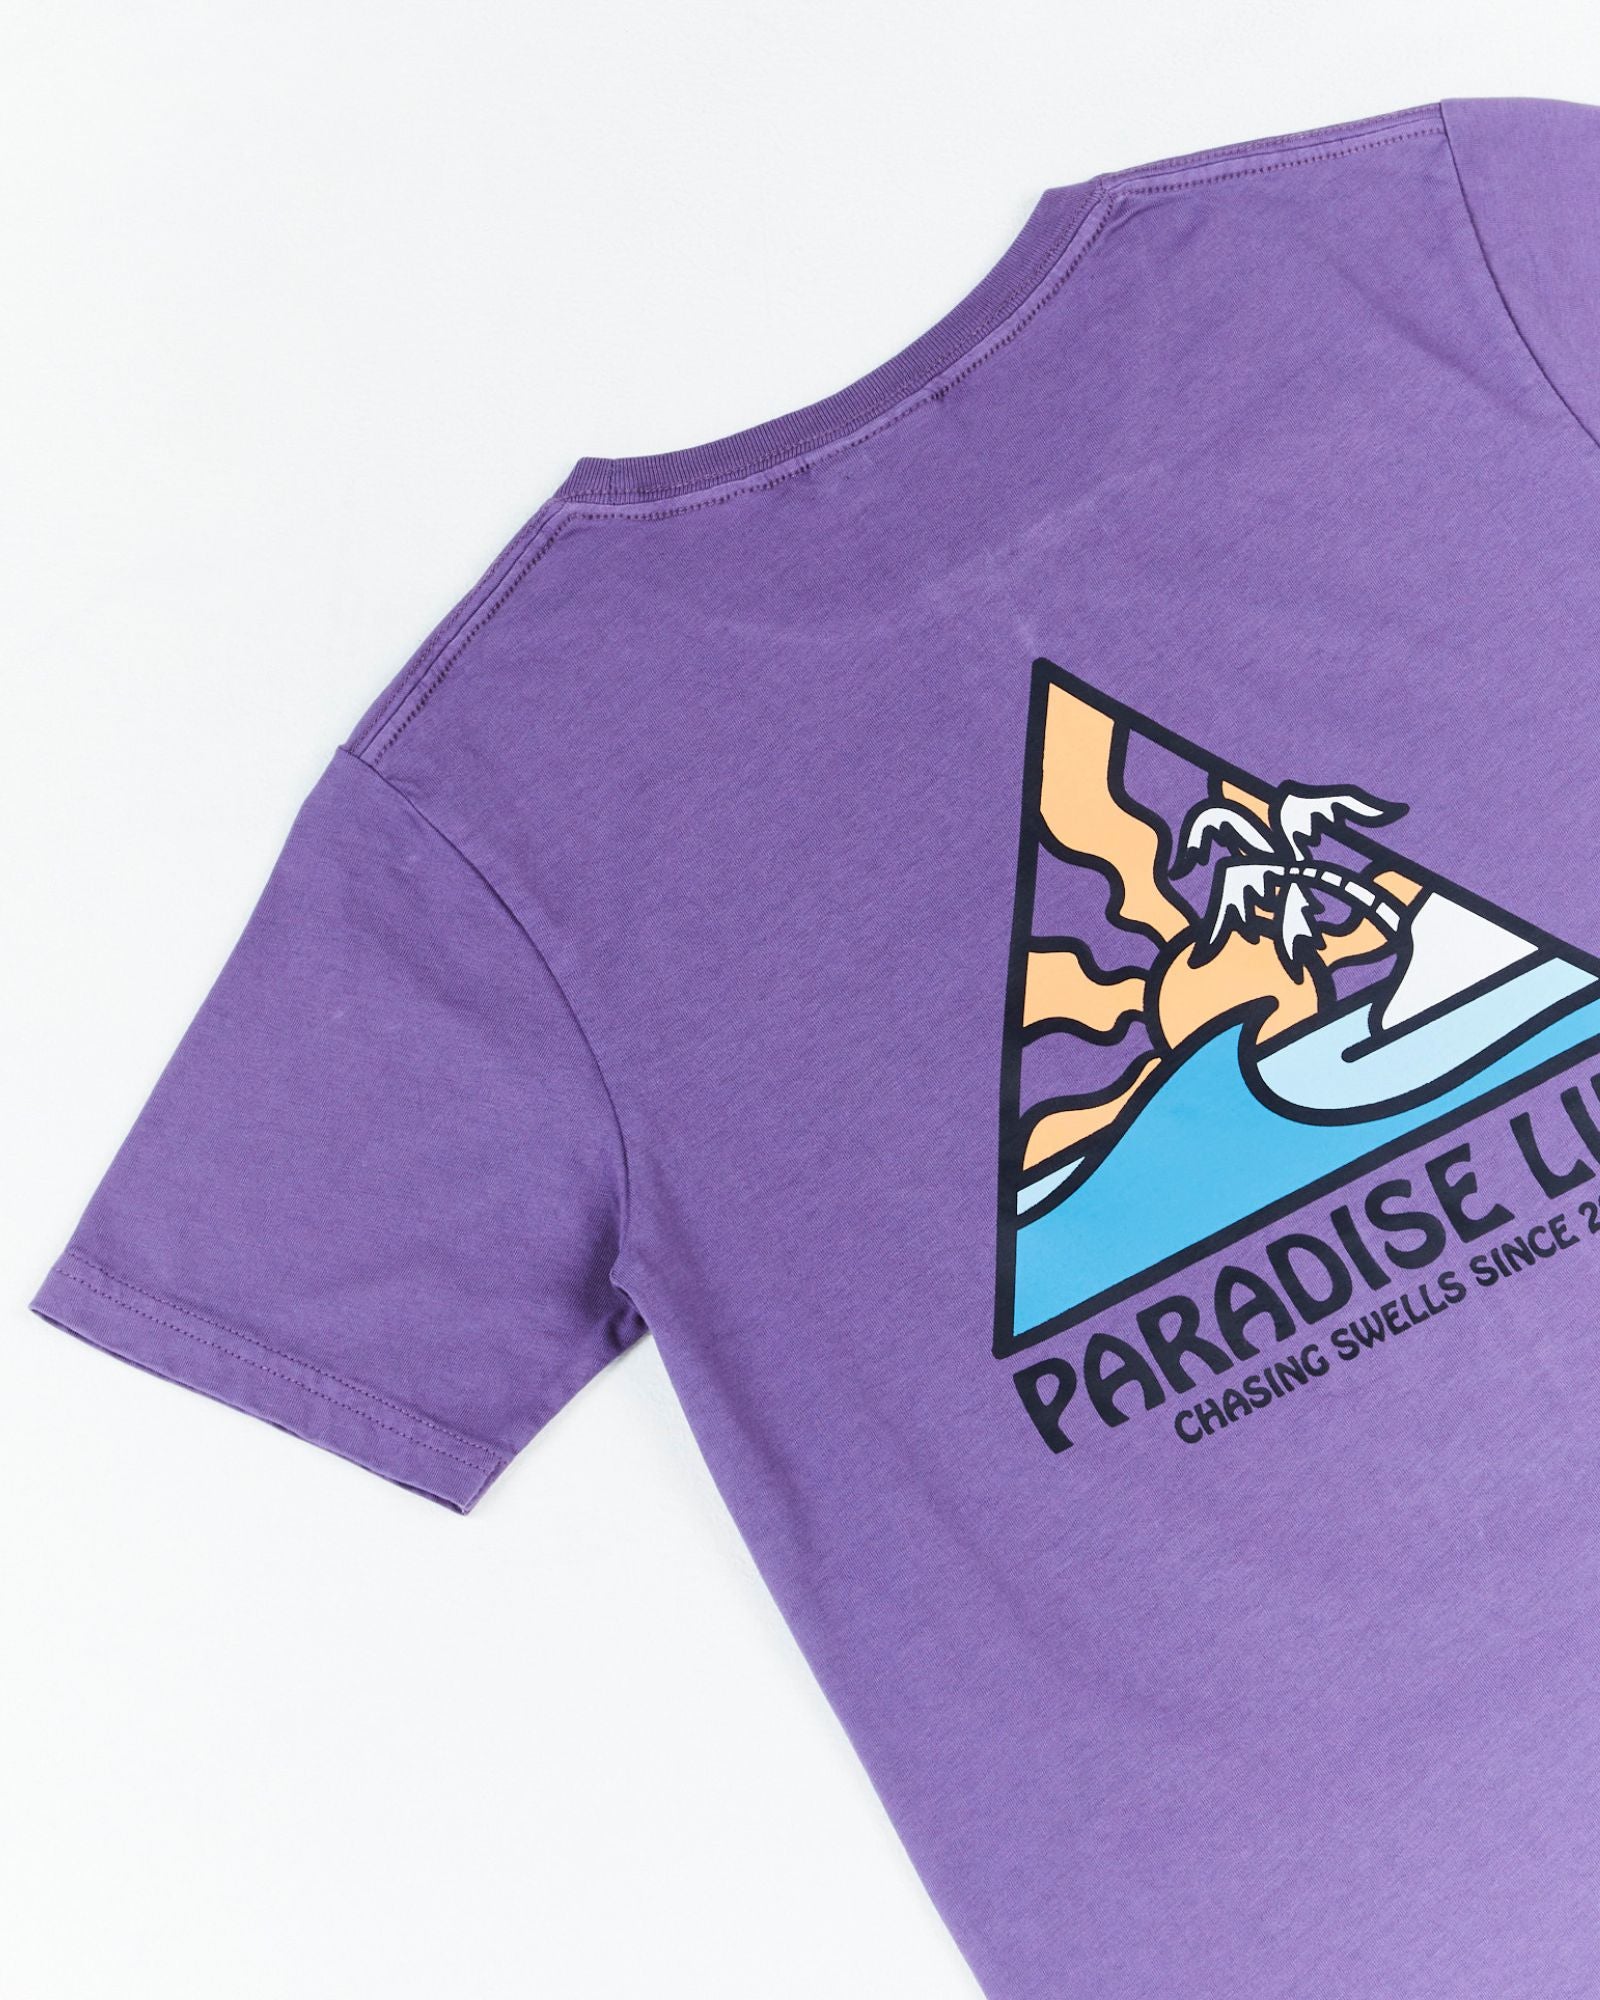 Alphabet Soup's Kids Thruster Tee for boys aged 2-7. Crafted from 100% Cotton Jersey. A purple pigment dye tee, regular fit, straight hemline, short sleeves, ribbed crew neckline, and a retro surf “Paradise Life” print to chest and back.